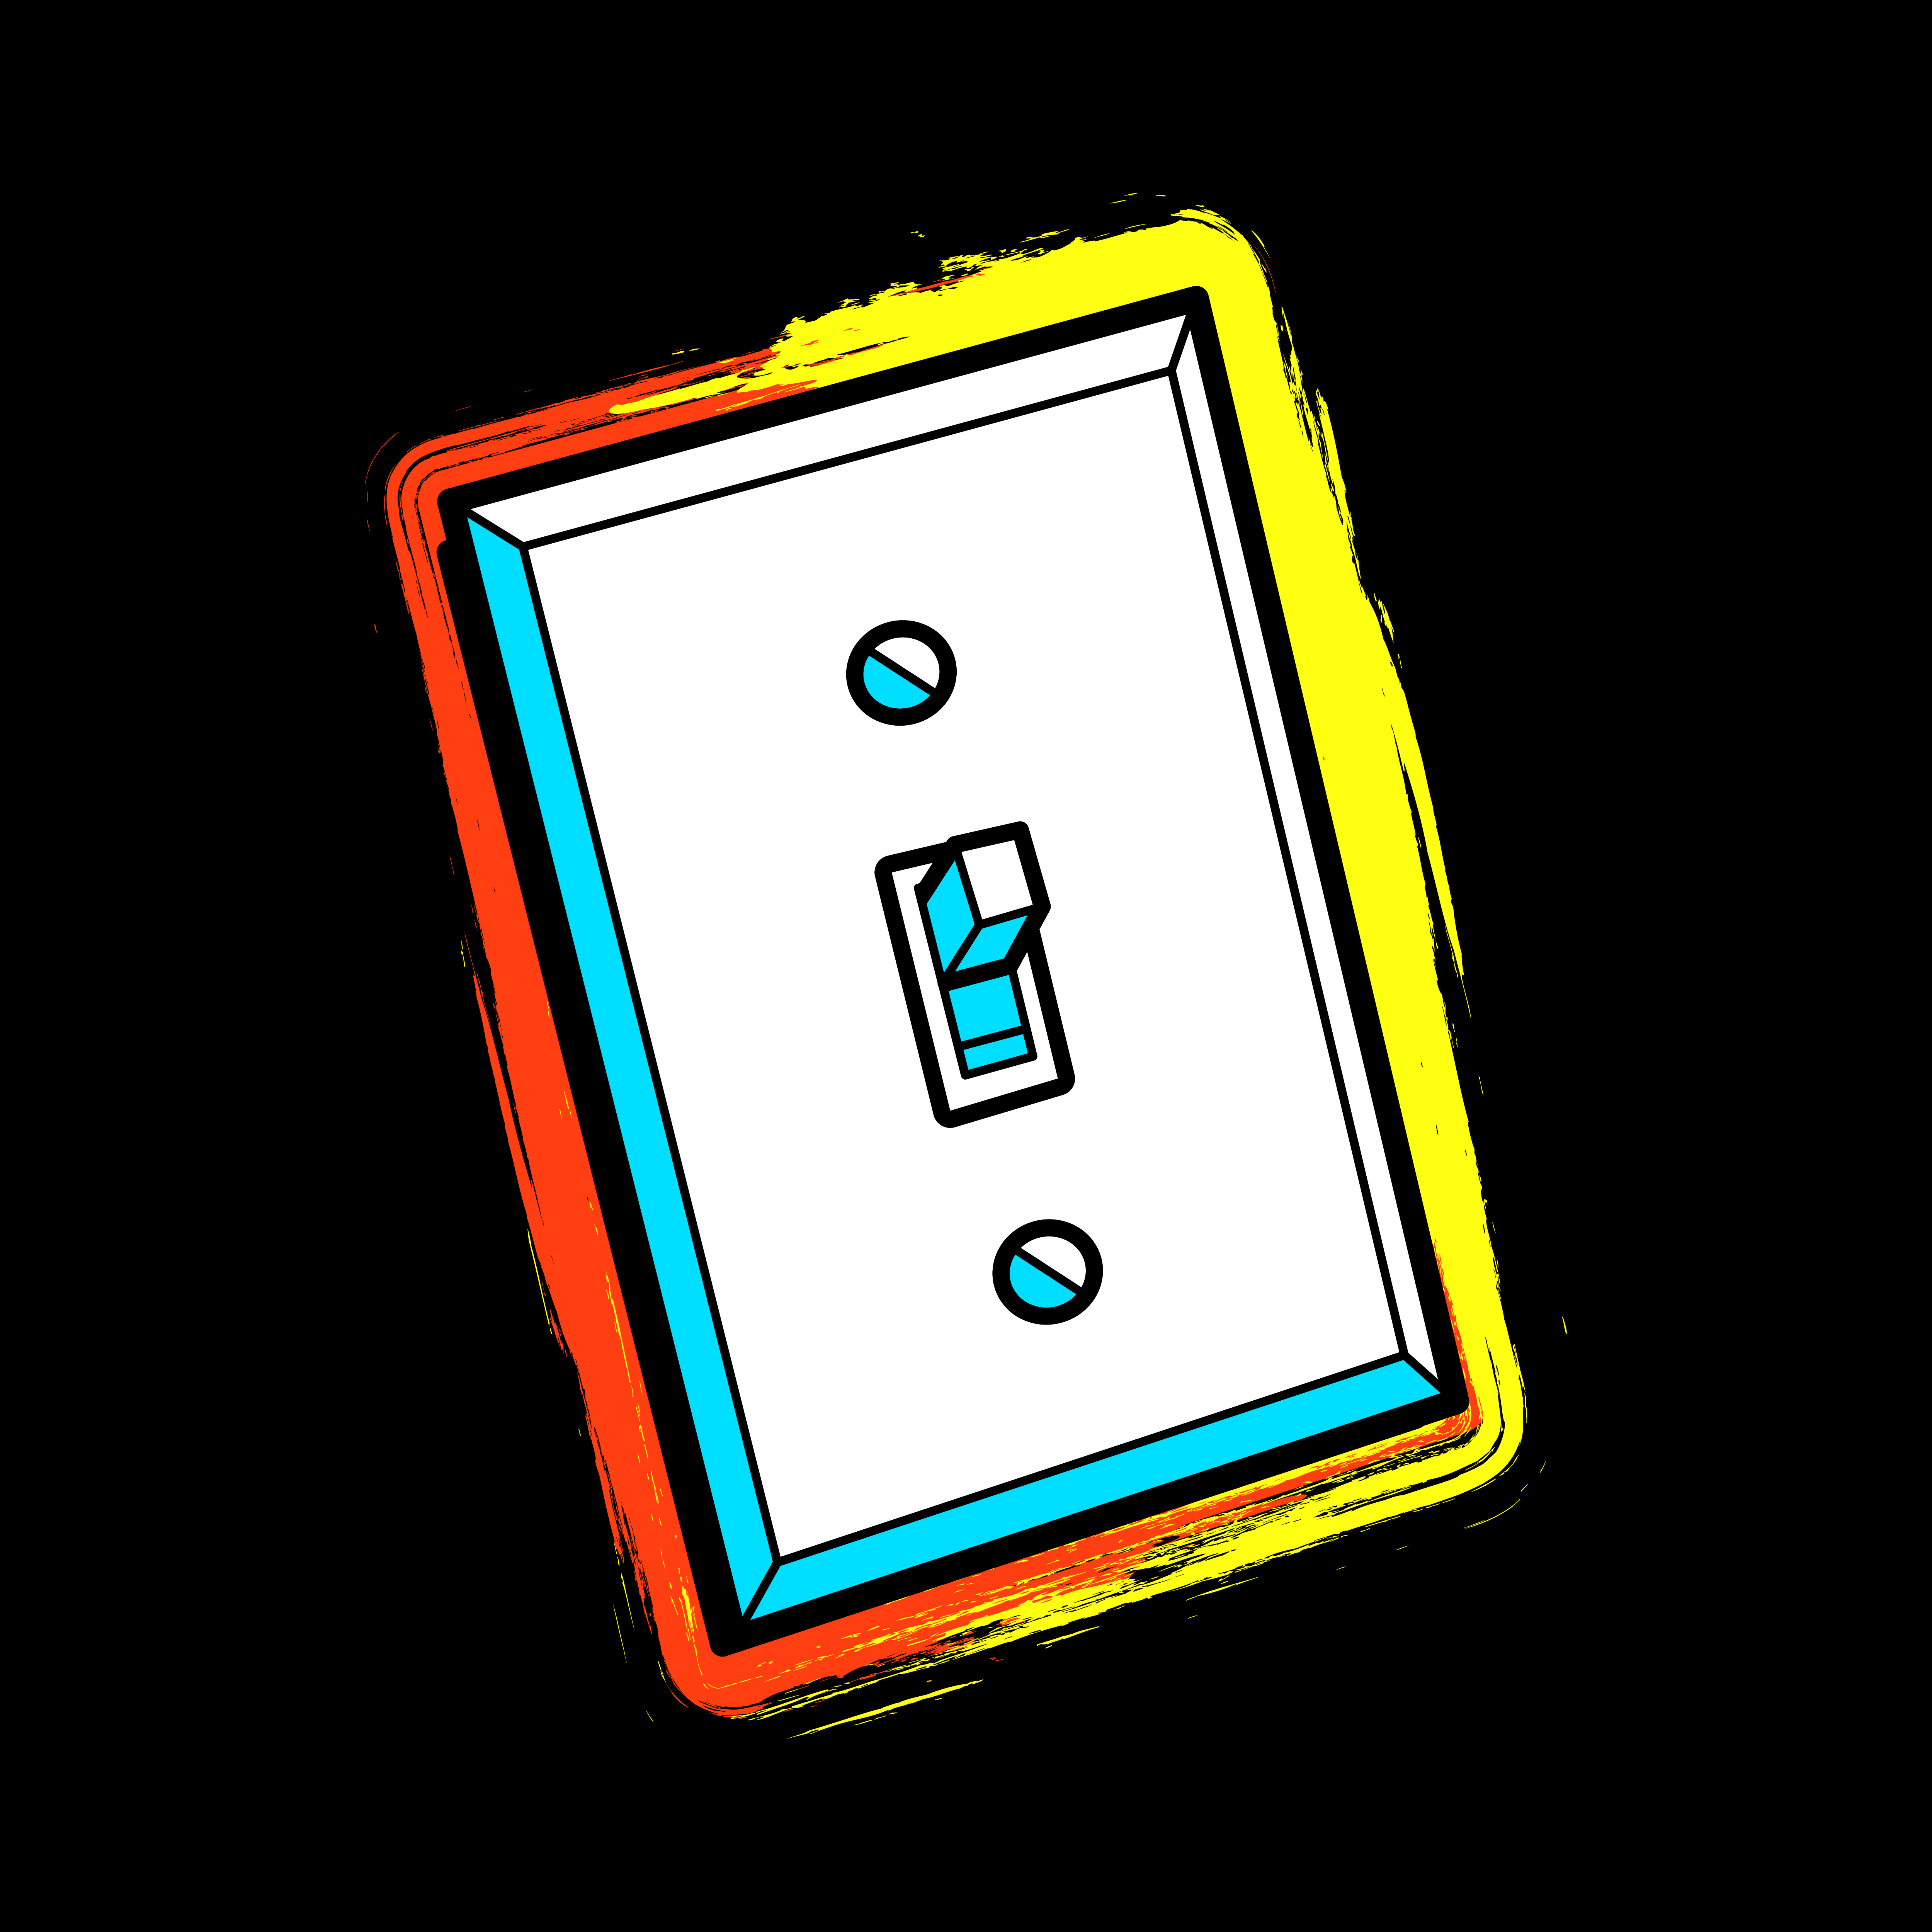 Download Lightswitch vector icon - Download Free Vectors, Clipart ...